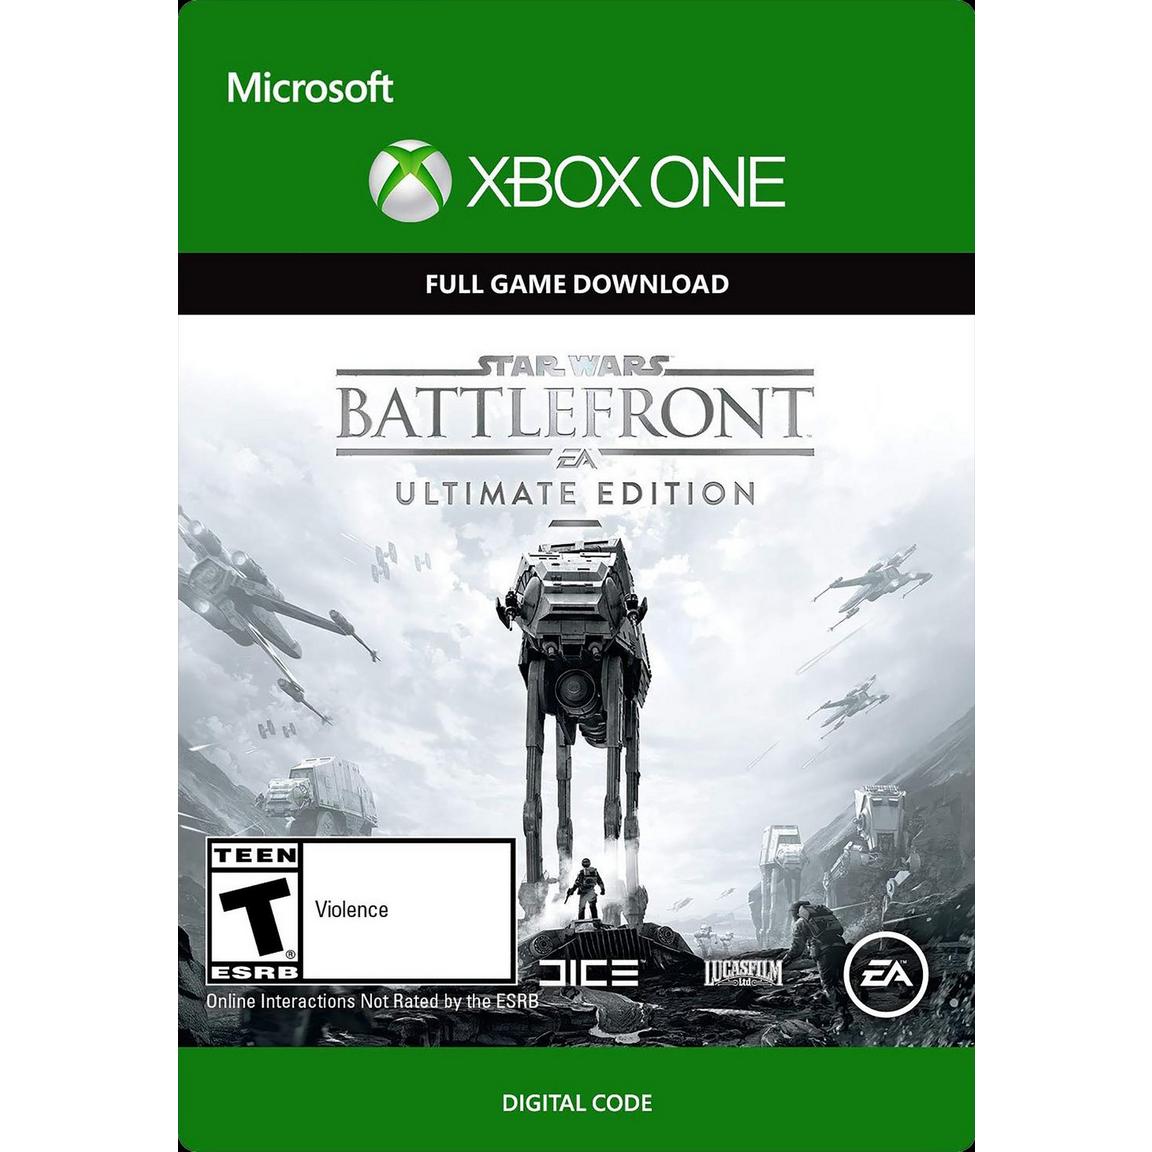 Star Wars Battlefront Ultimate Edition - Xbox One -  Electronic Arts, G3Q-00075